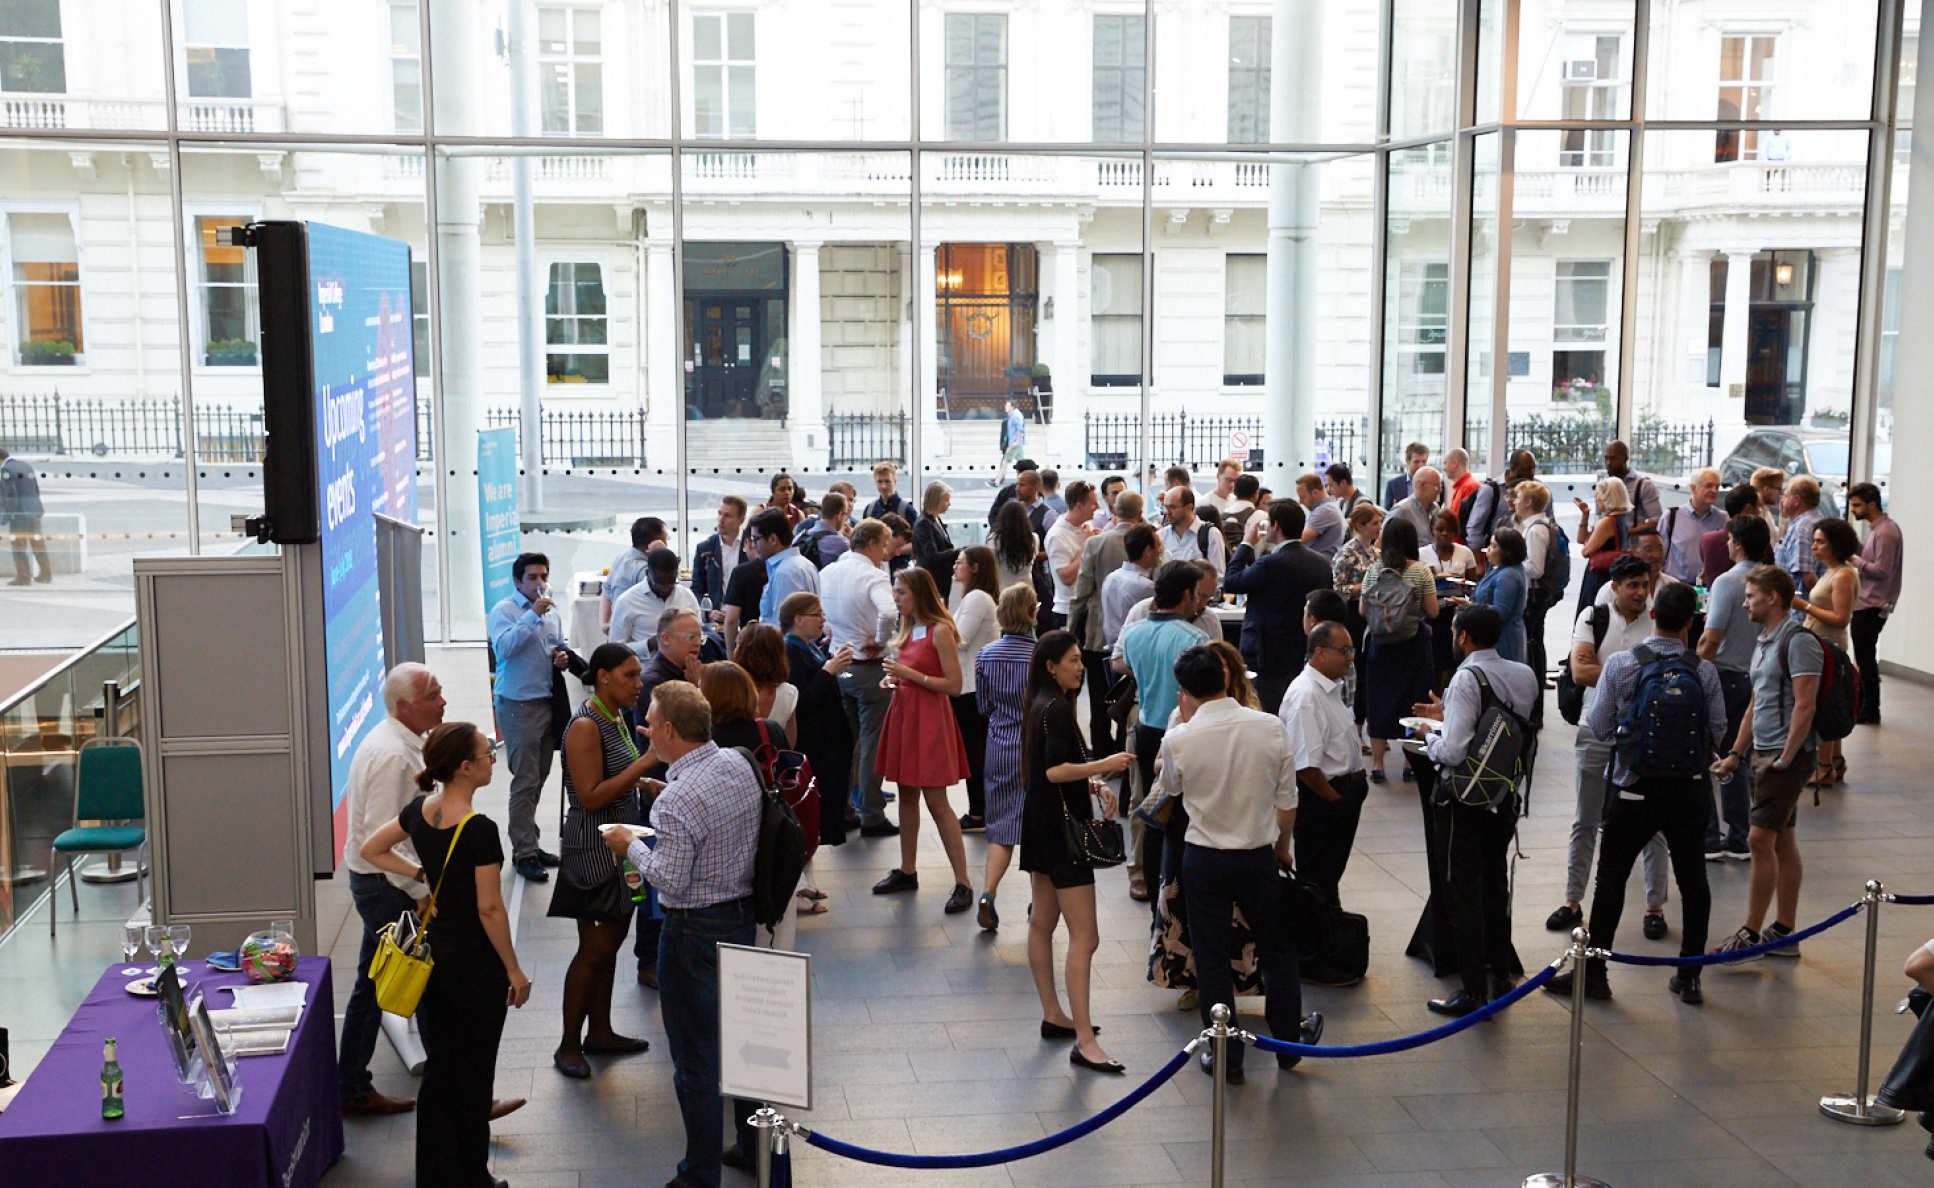 Alumni networking in the College main entrance